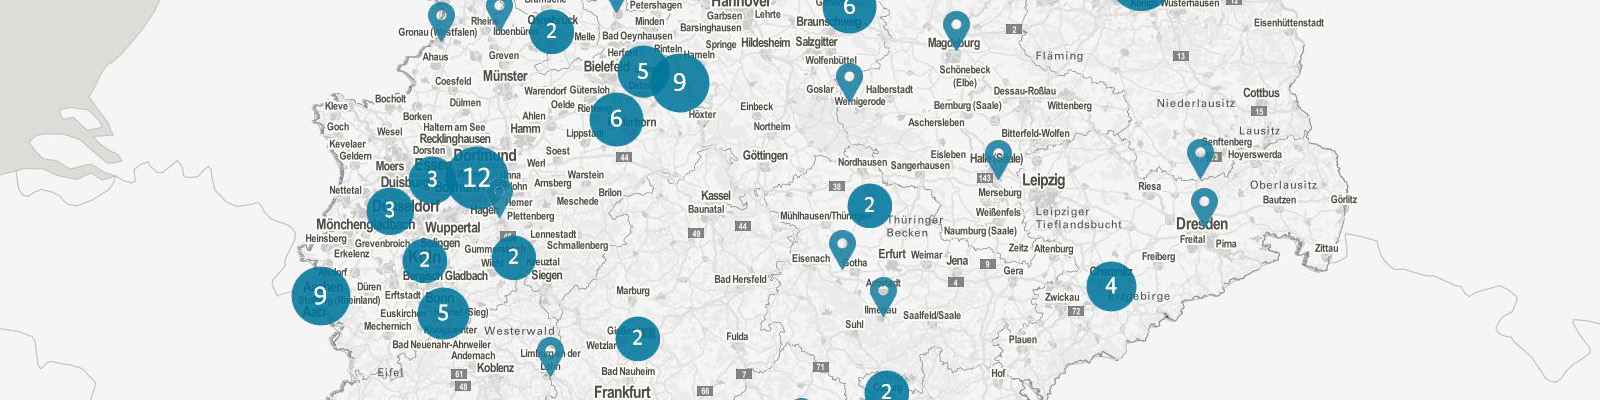 Map of Industrie 4.0 use cases; Source: BMWi